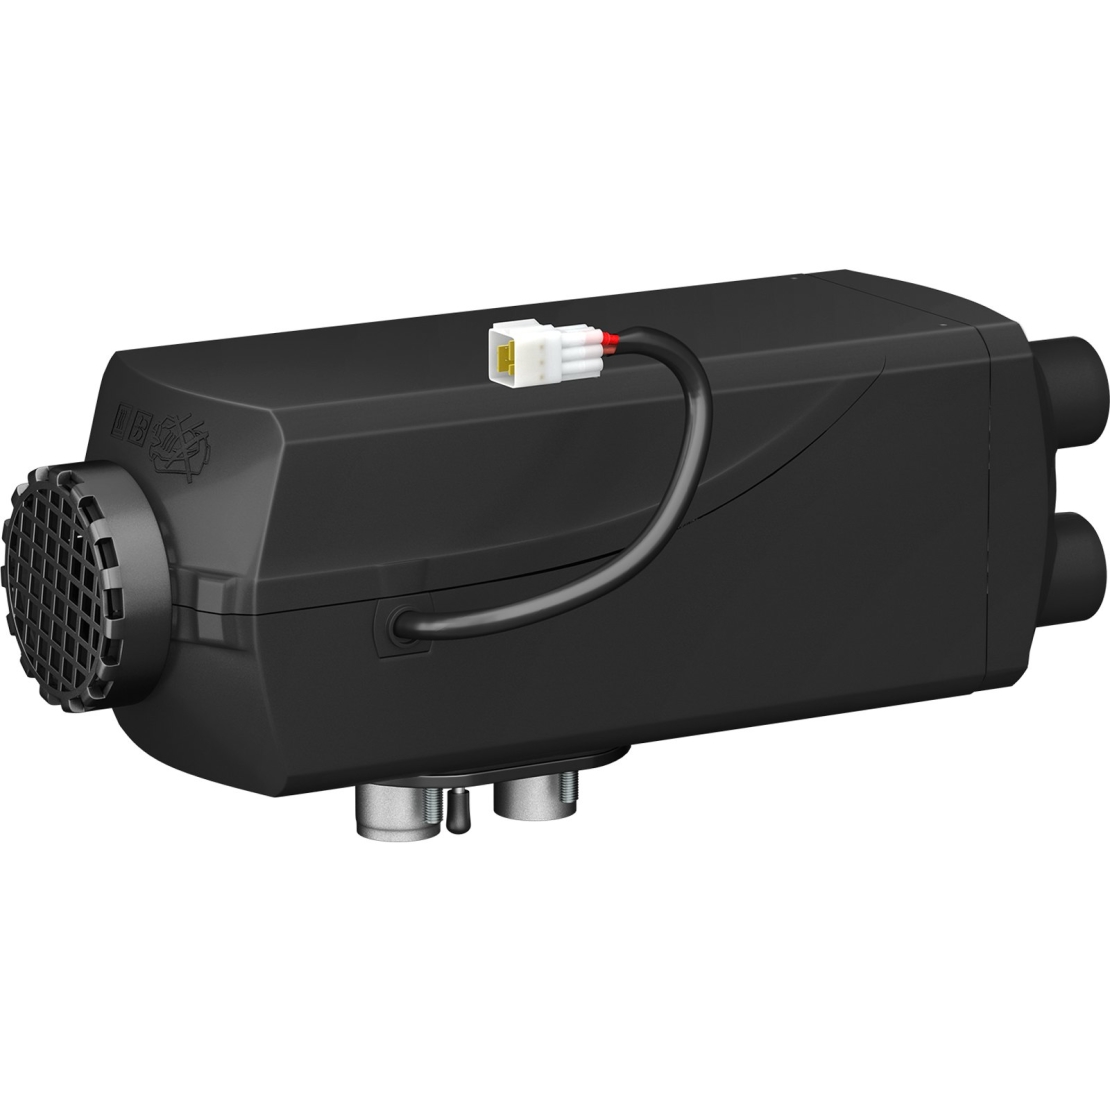 8KW LED Dry Diesel Heater with 4 outlets